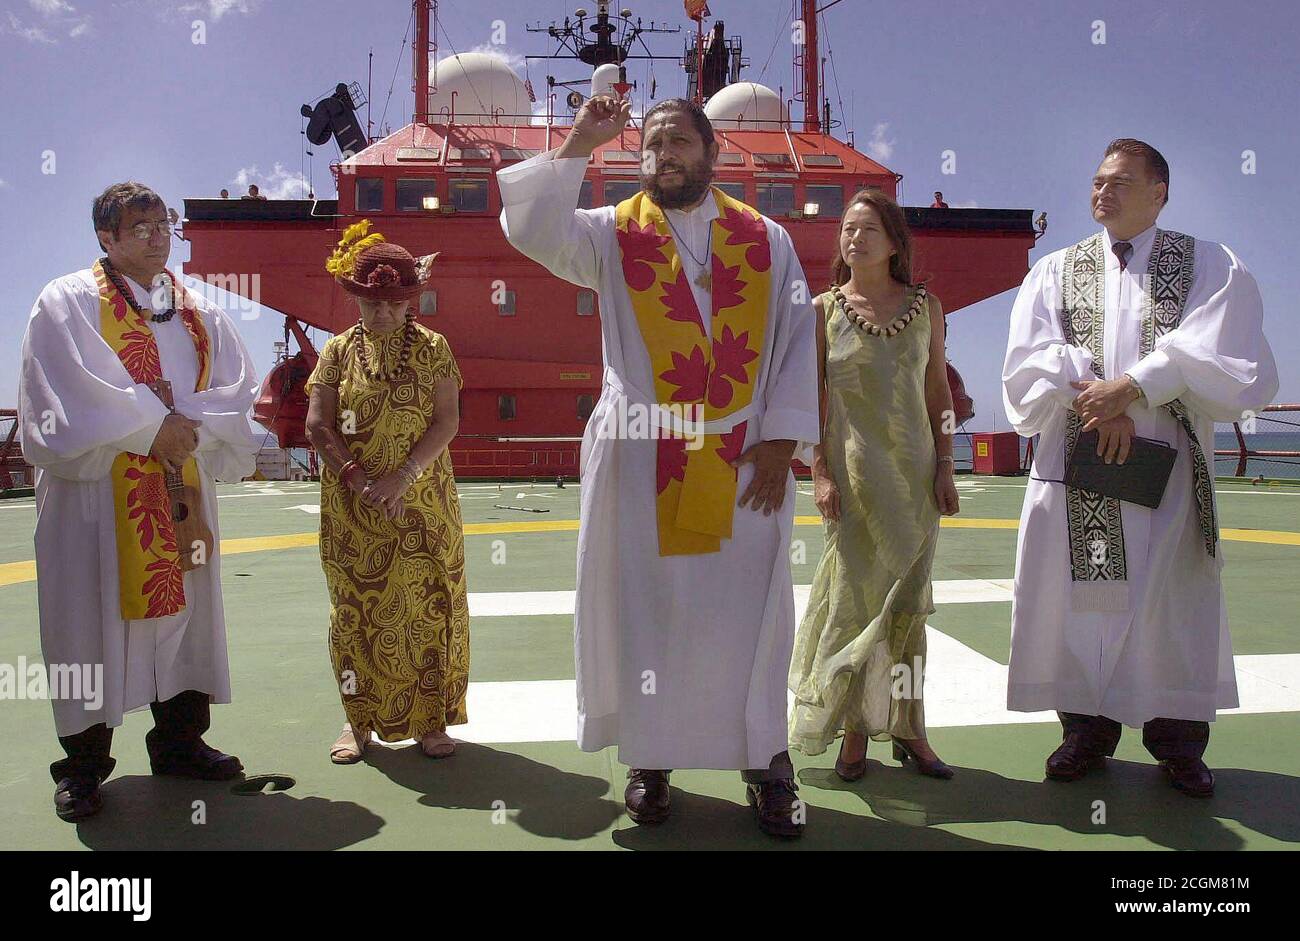 10/8/2001 - Members of the Kaumakapili Church perform a Hawaiian blessing Ceremony, on the flight deck of the Bahamian, Multi-purpose Diving Support Vessel (DSV) 'Rockwater 2', during recovery operations for the Japanese fishing vessel Ehime Maru Stock Photo